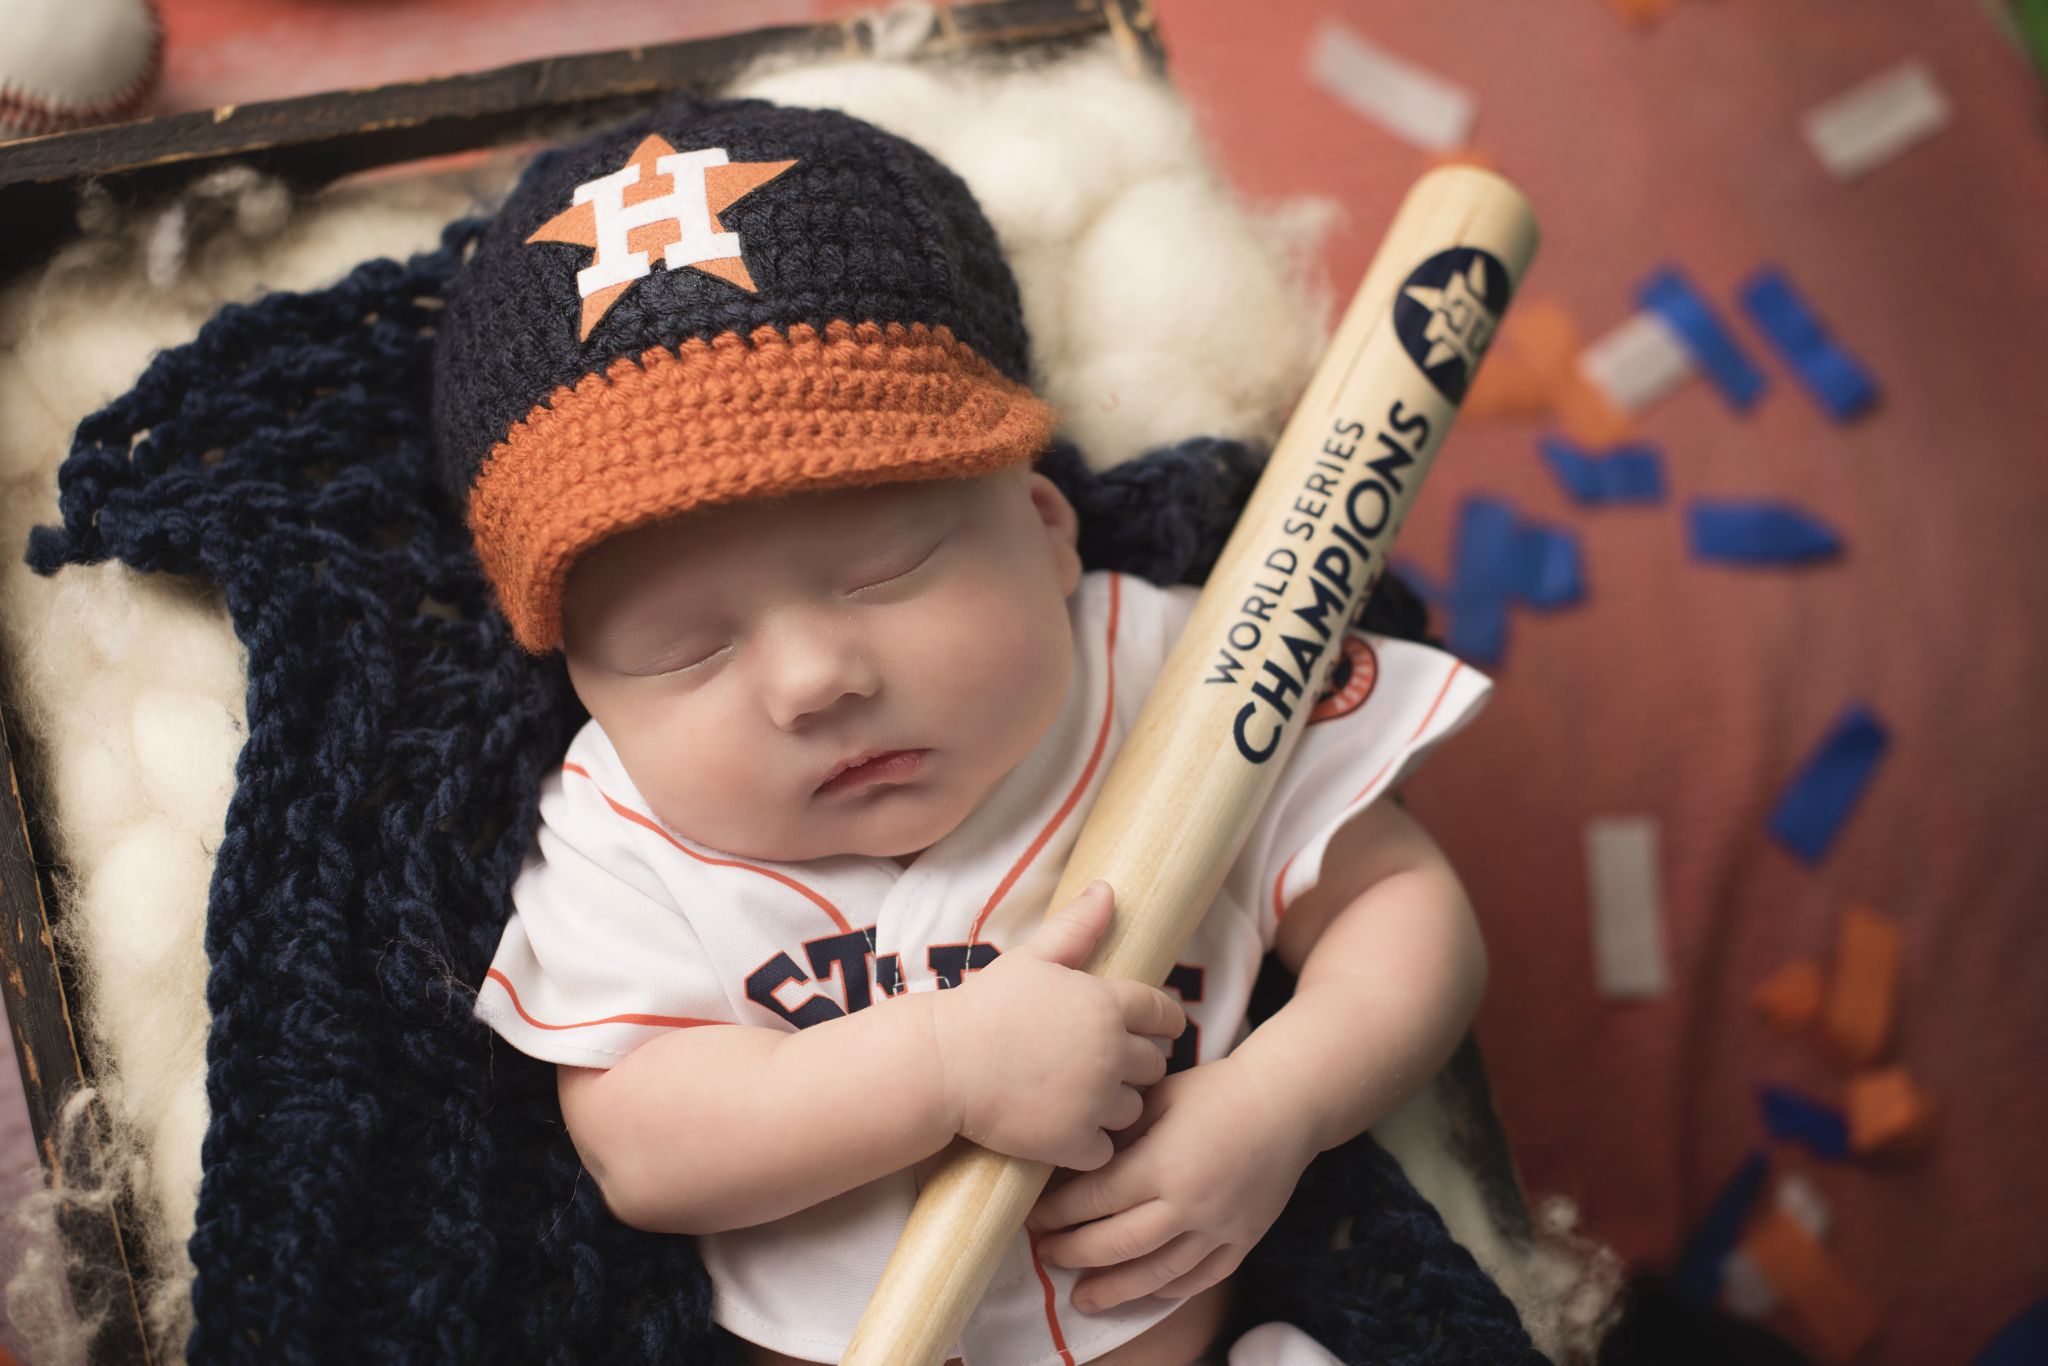 Astros baby photo shoot is the sweetest celebration of the World Series win  so far